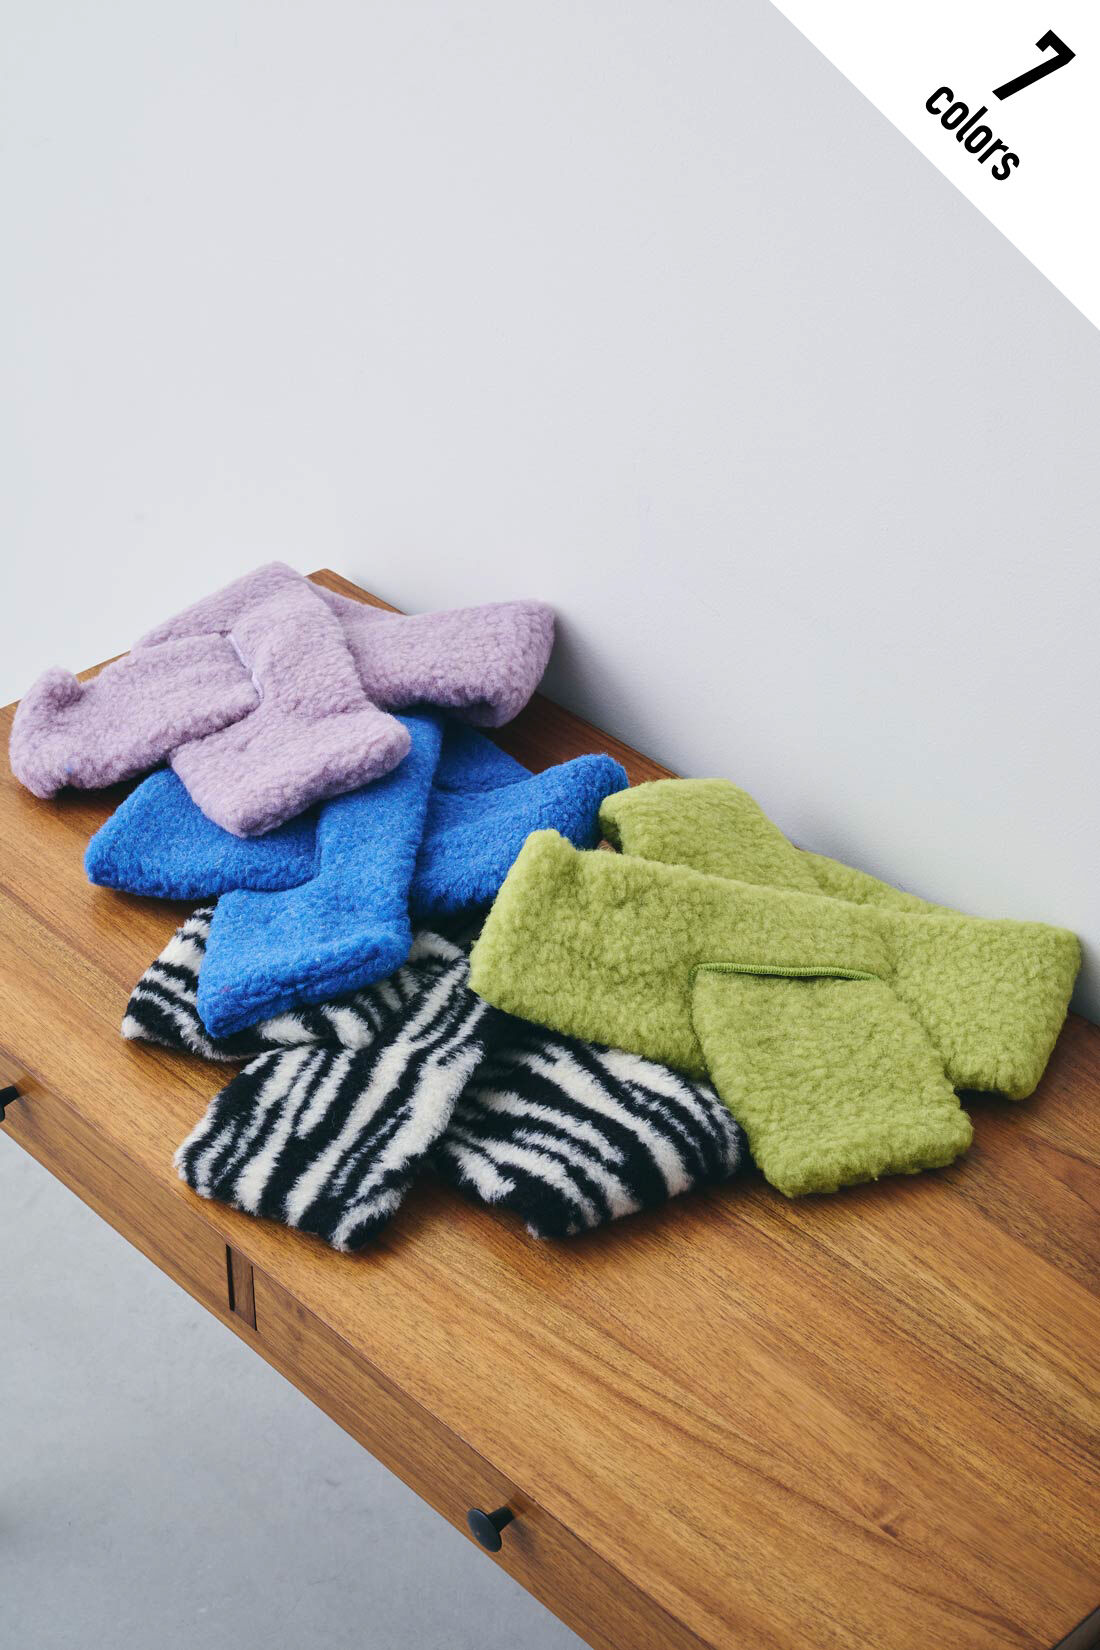 Real Stock|MEDE19F 〈SELECT〉 【SHEEP BY THESEA】 WOOL　マフラー|上から〈LILY〉〈DEEP BLUE〉〈ZEBRA〉〈GREEN PEA〉